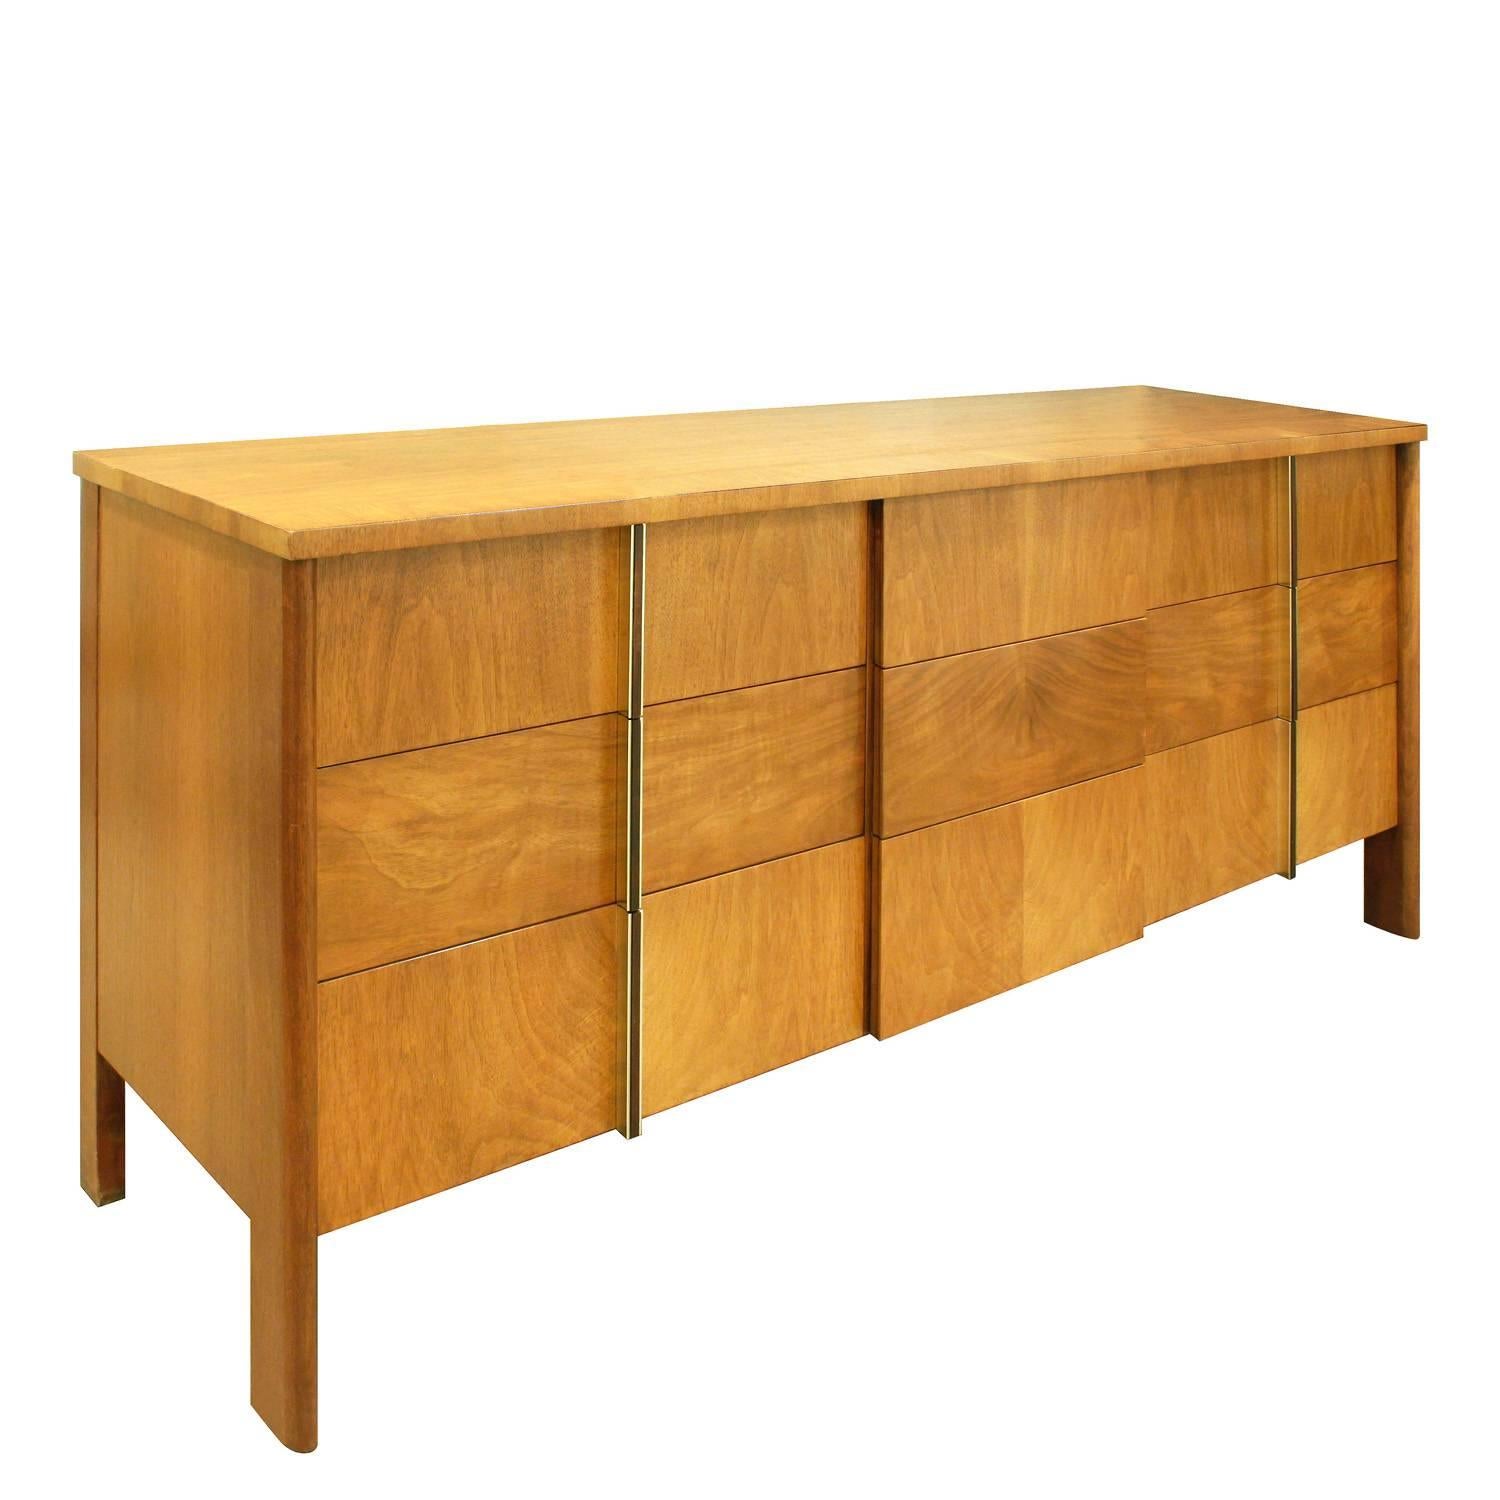 Modern John Widdicomb Chest of Drawers in Walnut with Rosewood and Chrome Pulls, 1950s